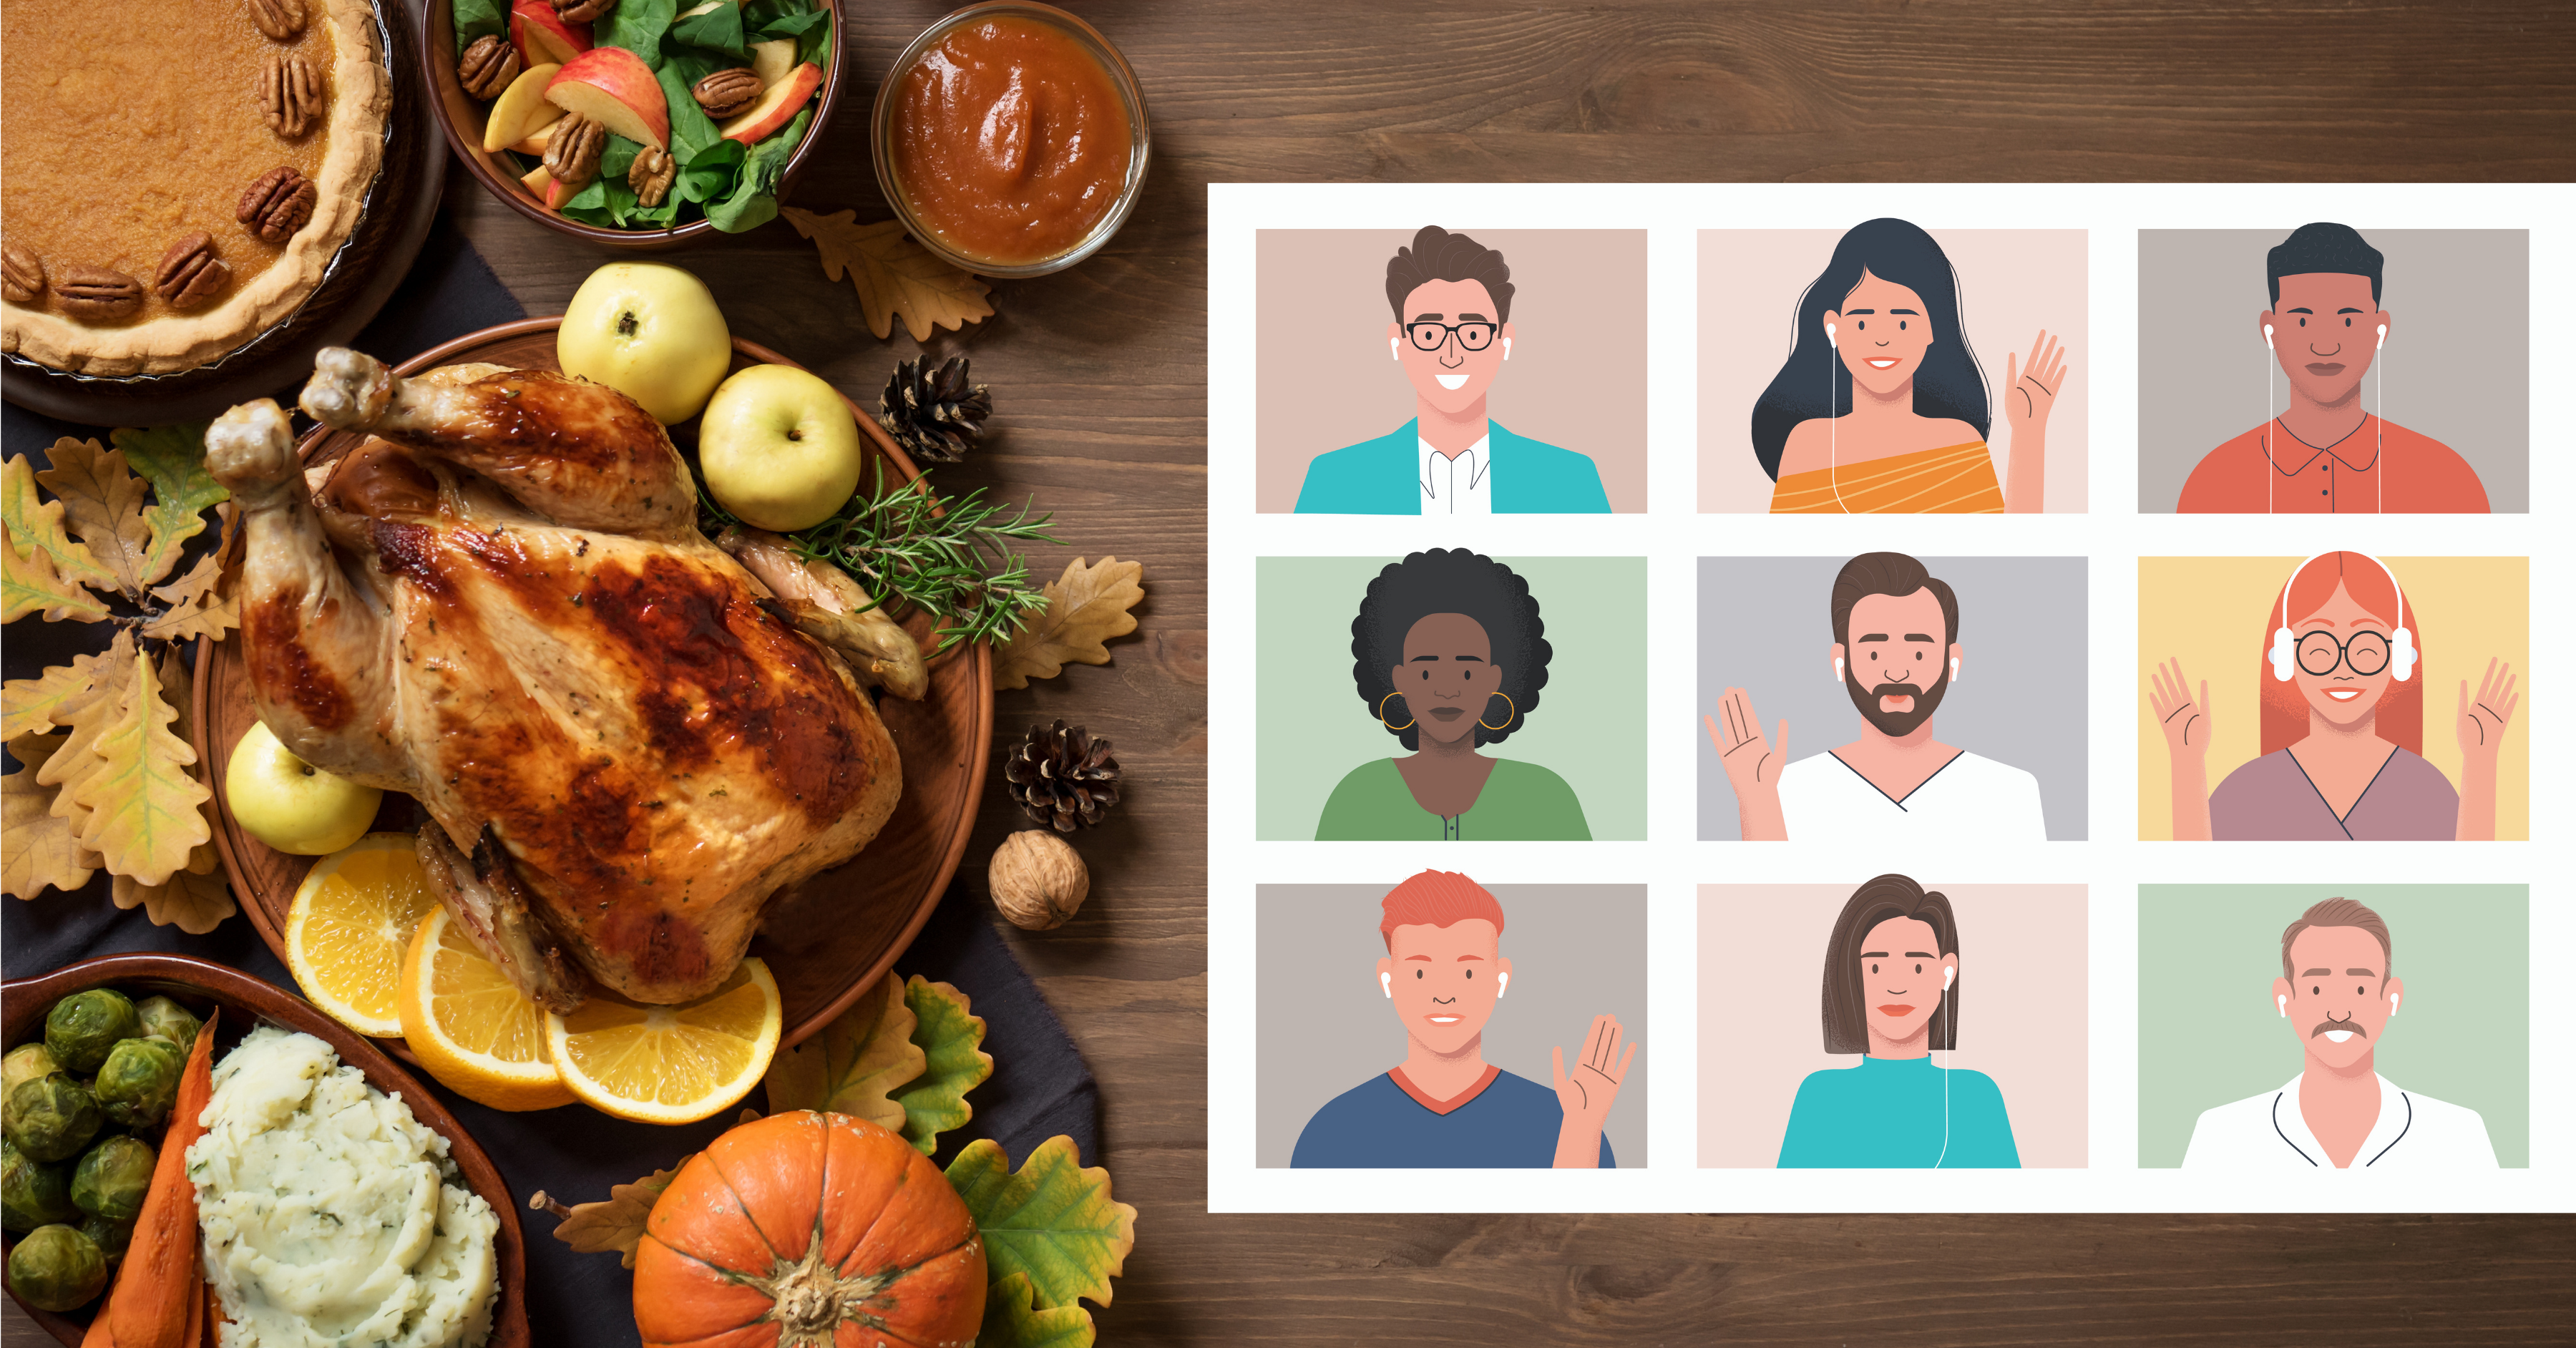 A Thanksgiving feast featuring a turkey and side dishes next to a video call graphic of 9 people.